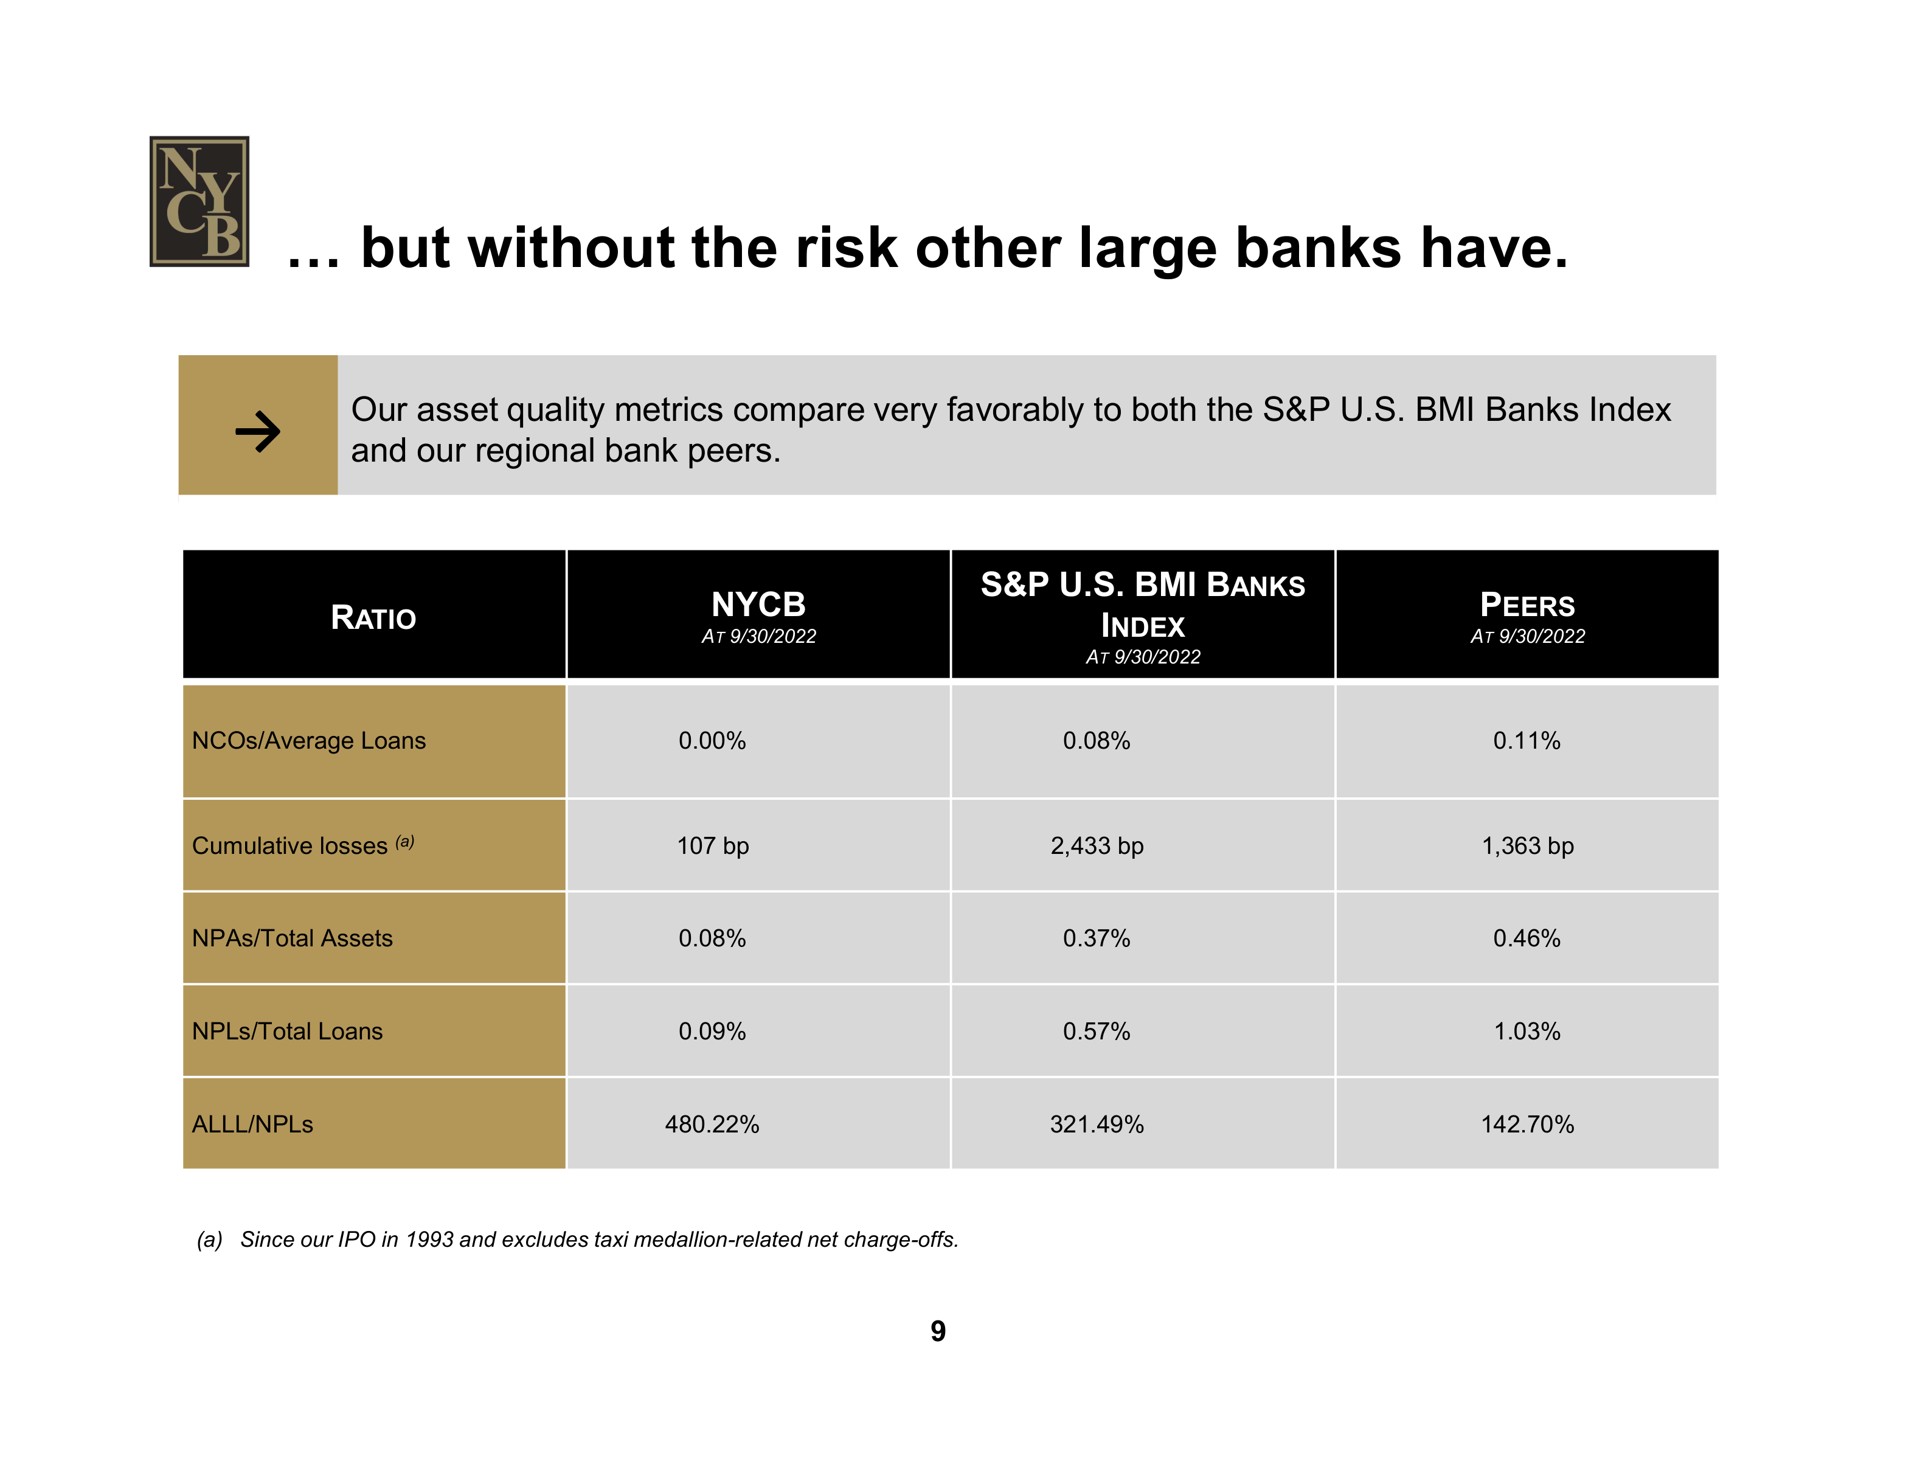 but without the risk other large banks have | New York Community Bancorp